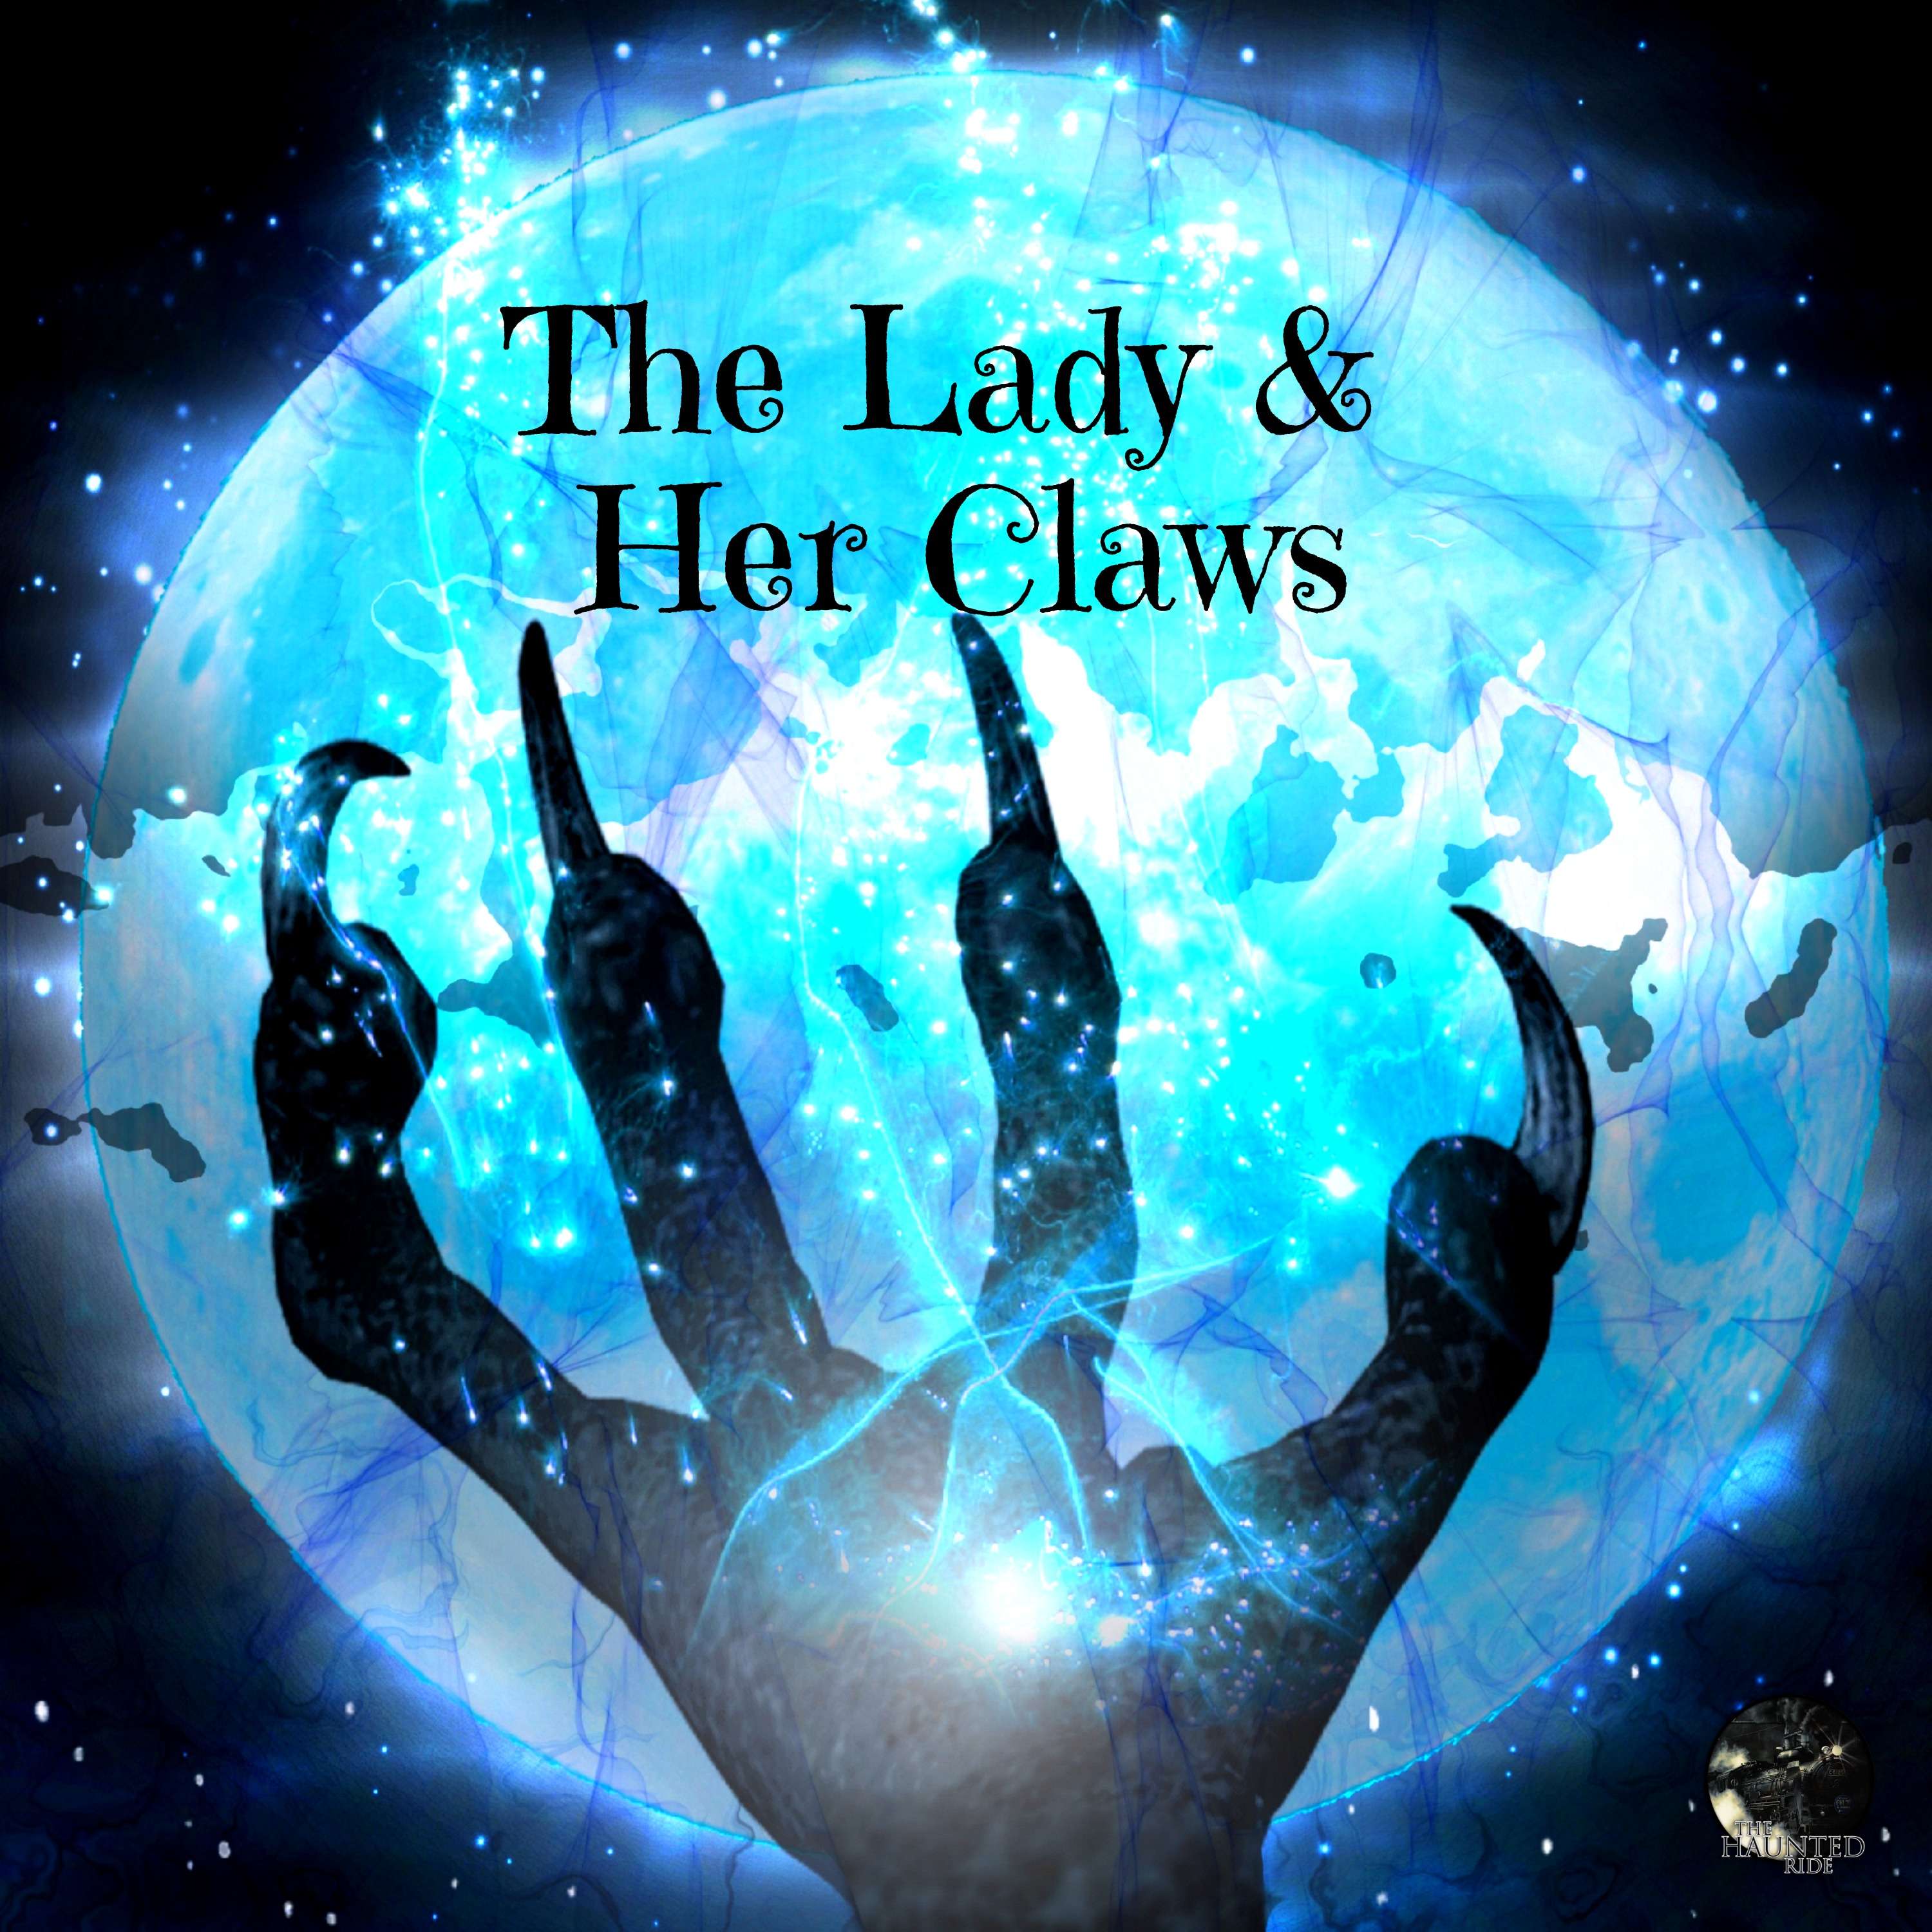 35: The Lady & Her Claws